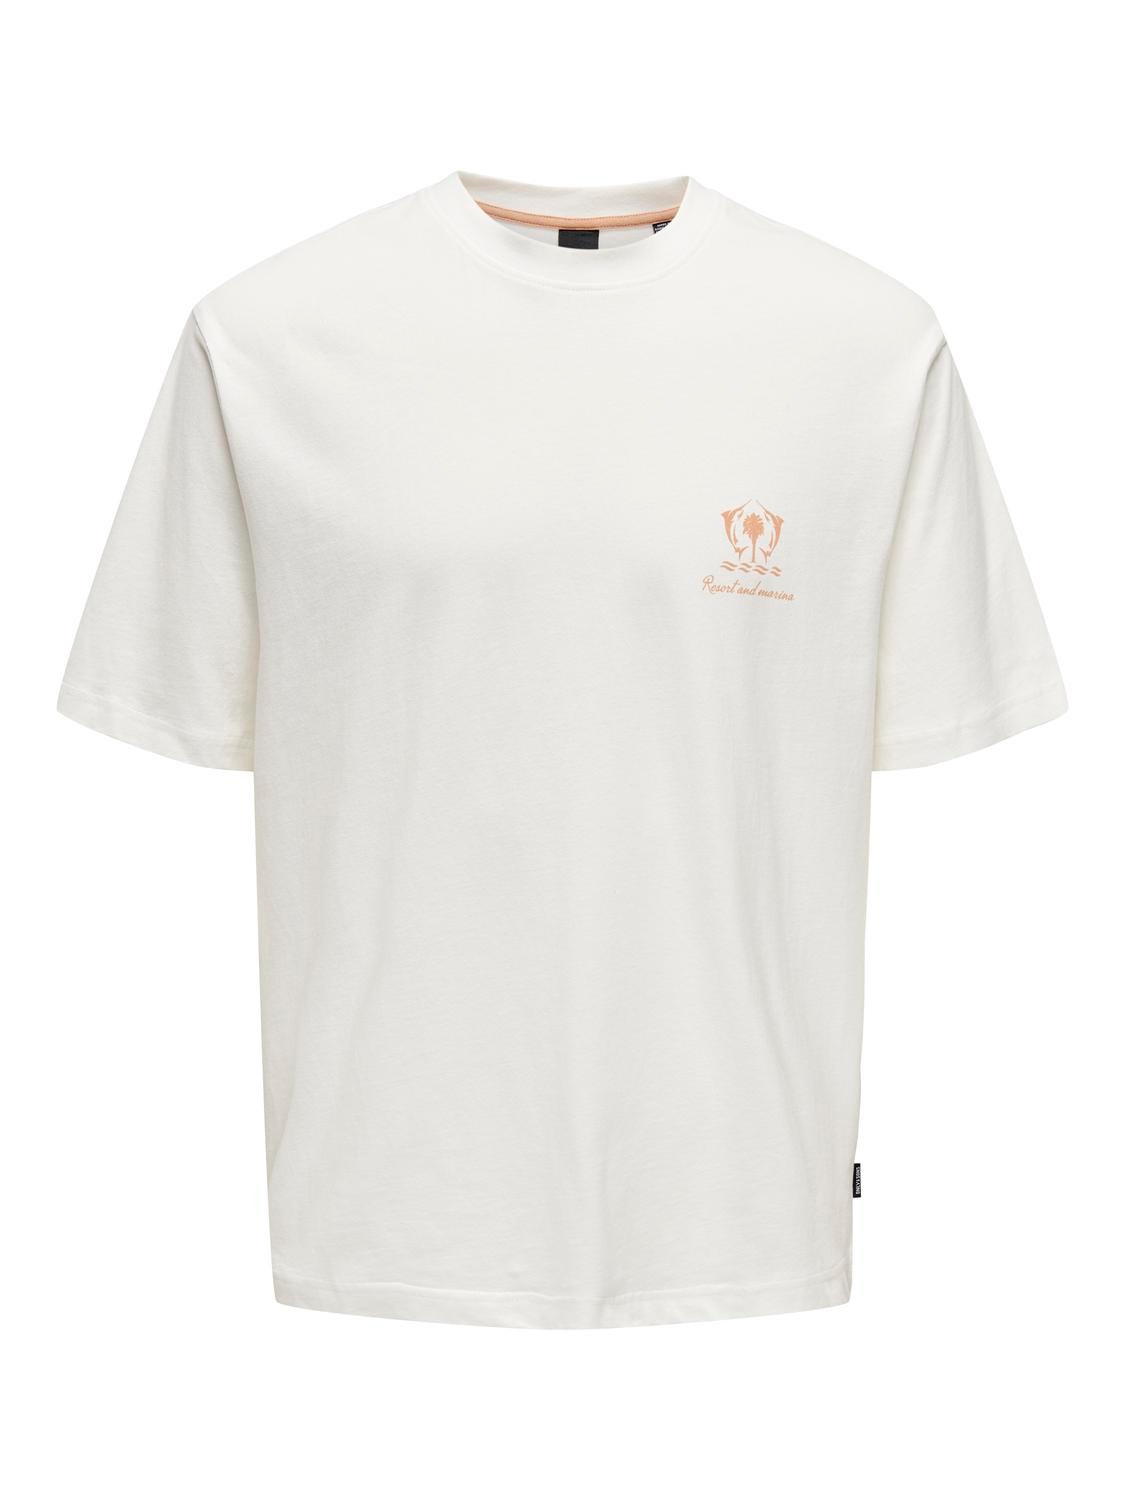 ONLY & SONS Relaxed Fit Round Neck T-Shirt -Bright White - 22029482